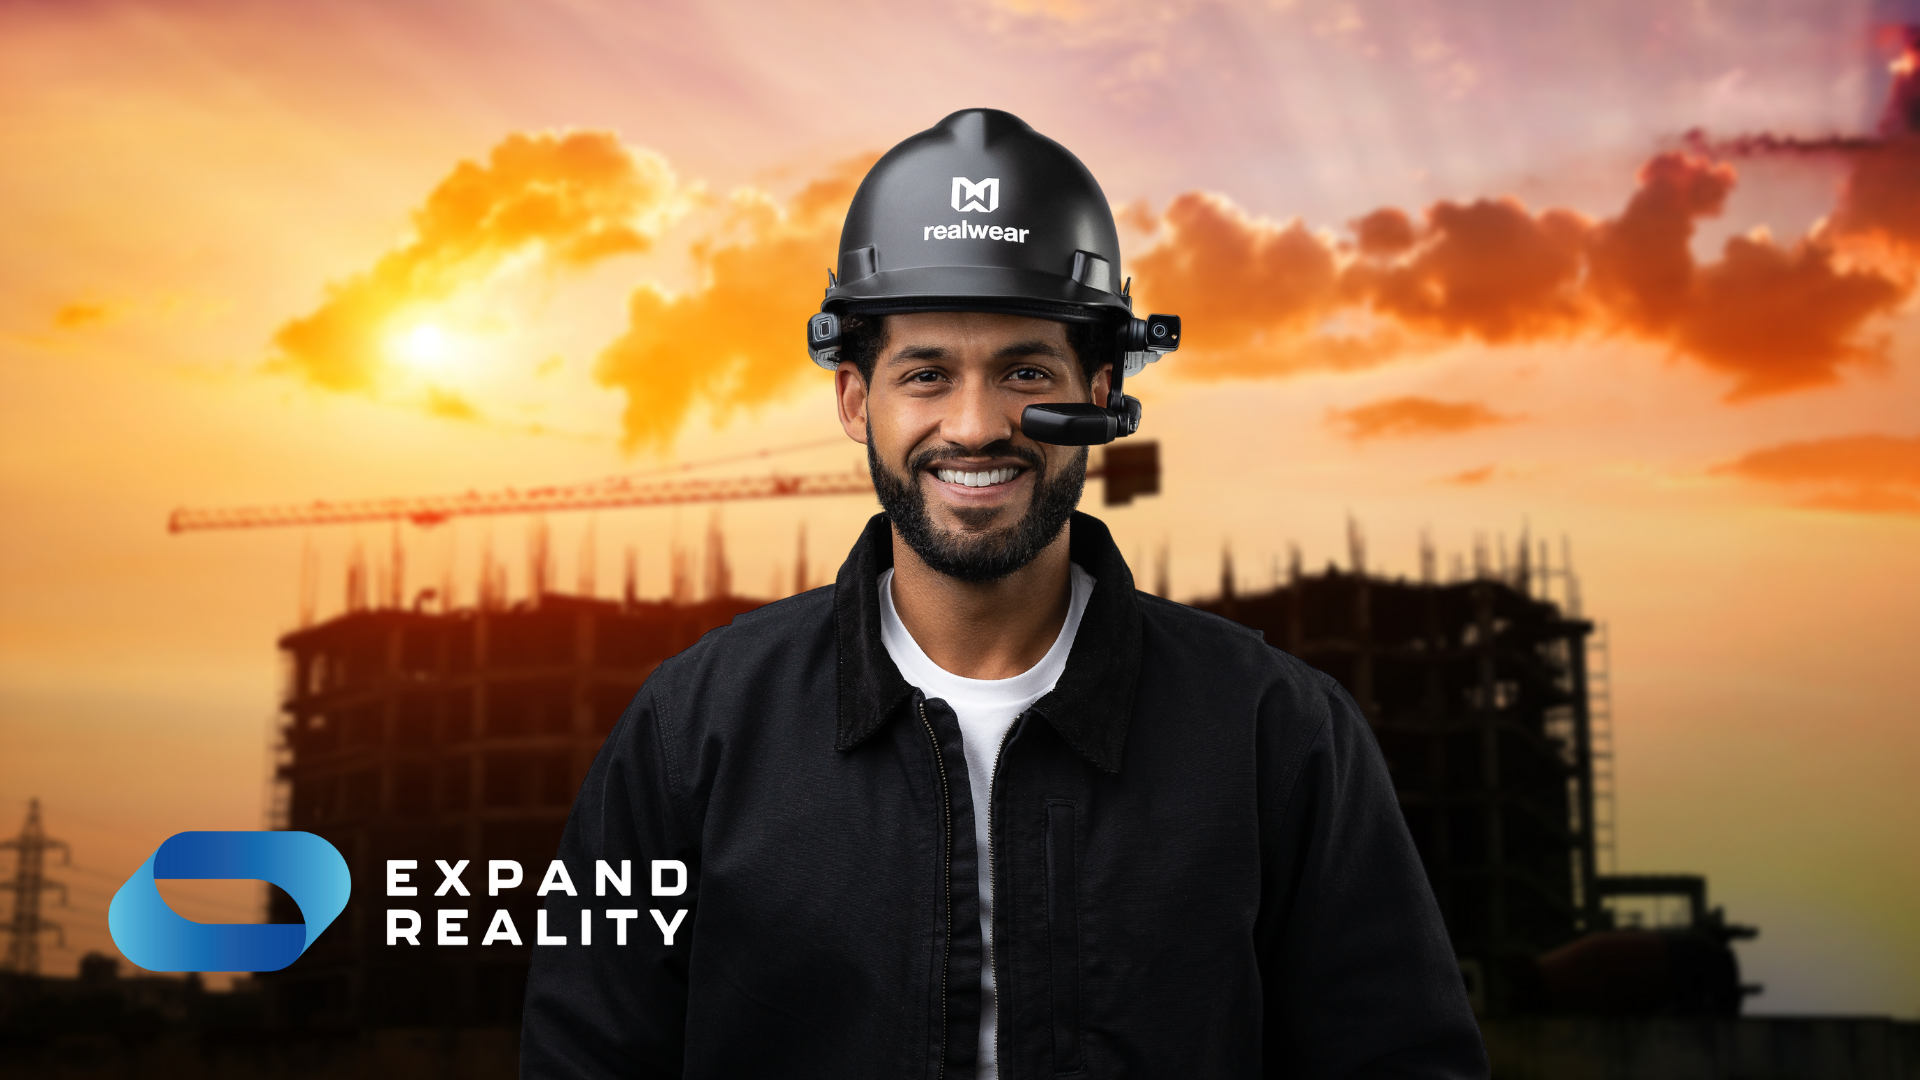 Discover the productivity-boosting benefits of the RealWear HMT-1 headset – as well as key industry use cases – in our in-depth XR hardware analysis.